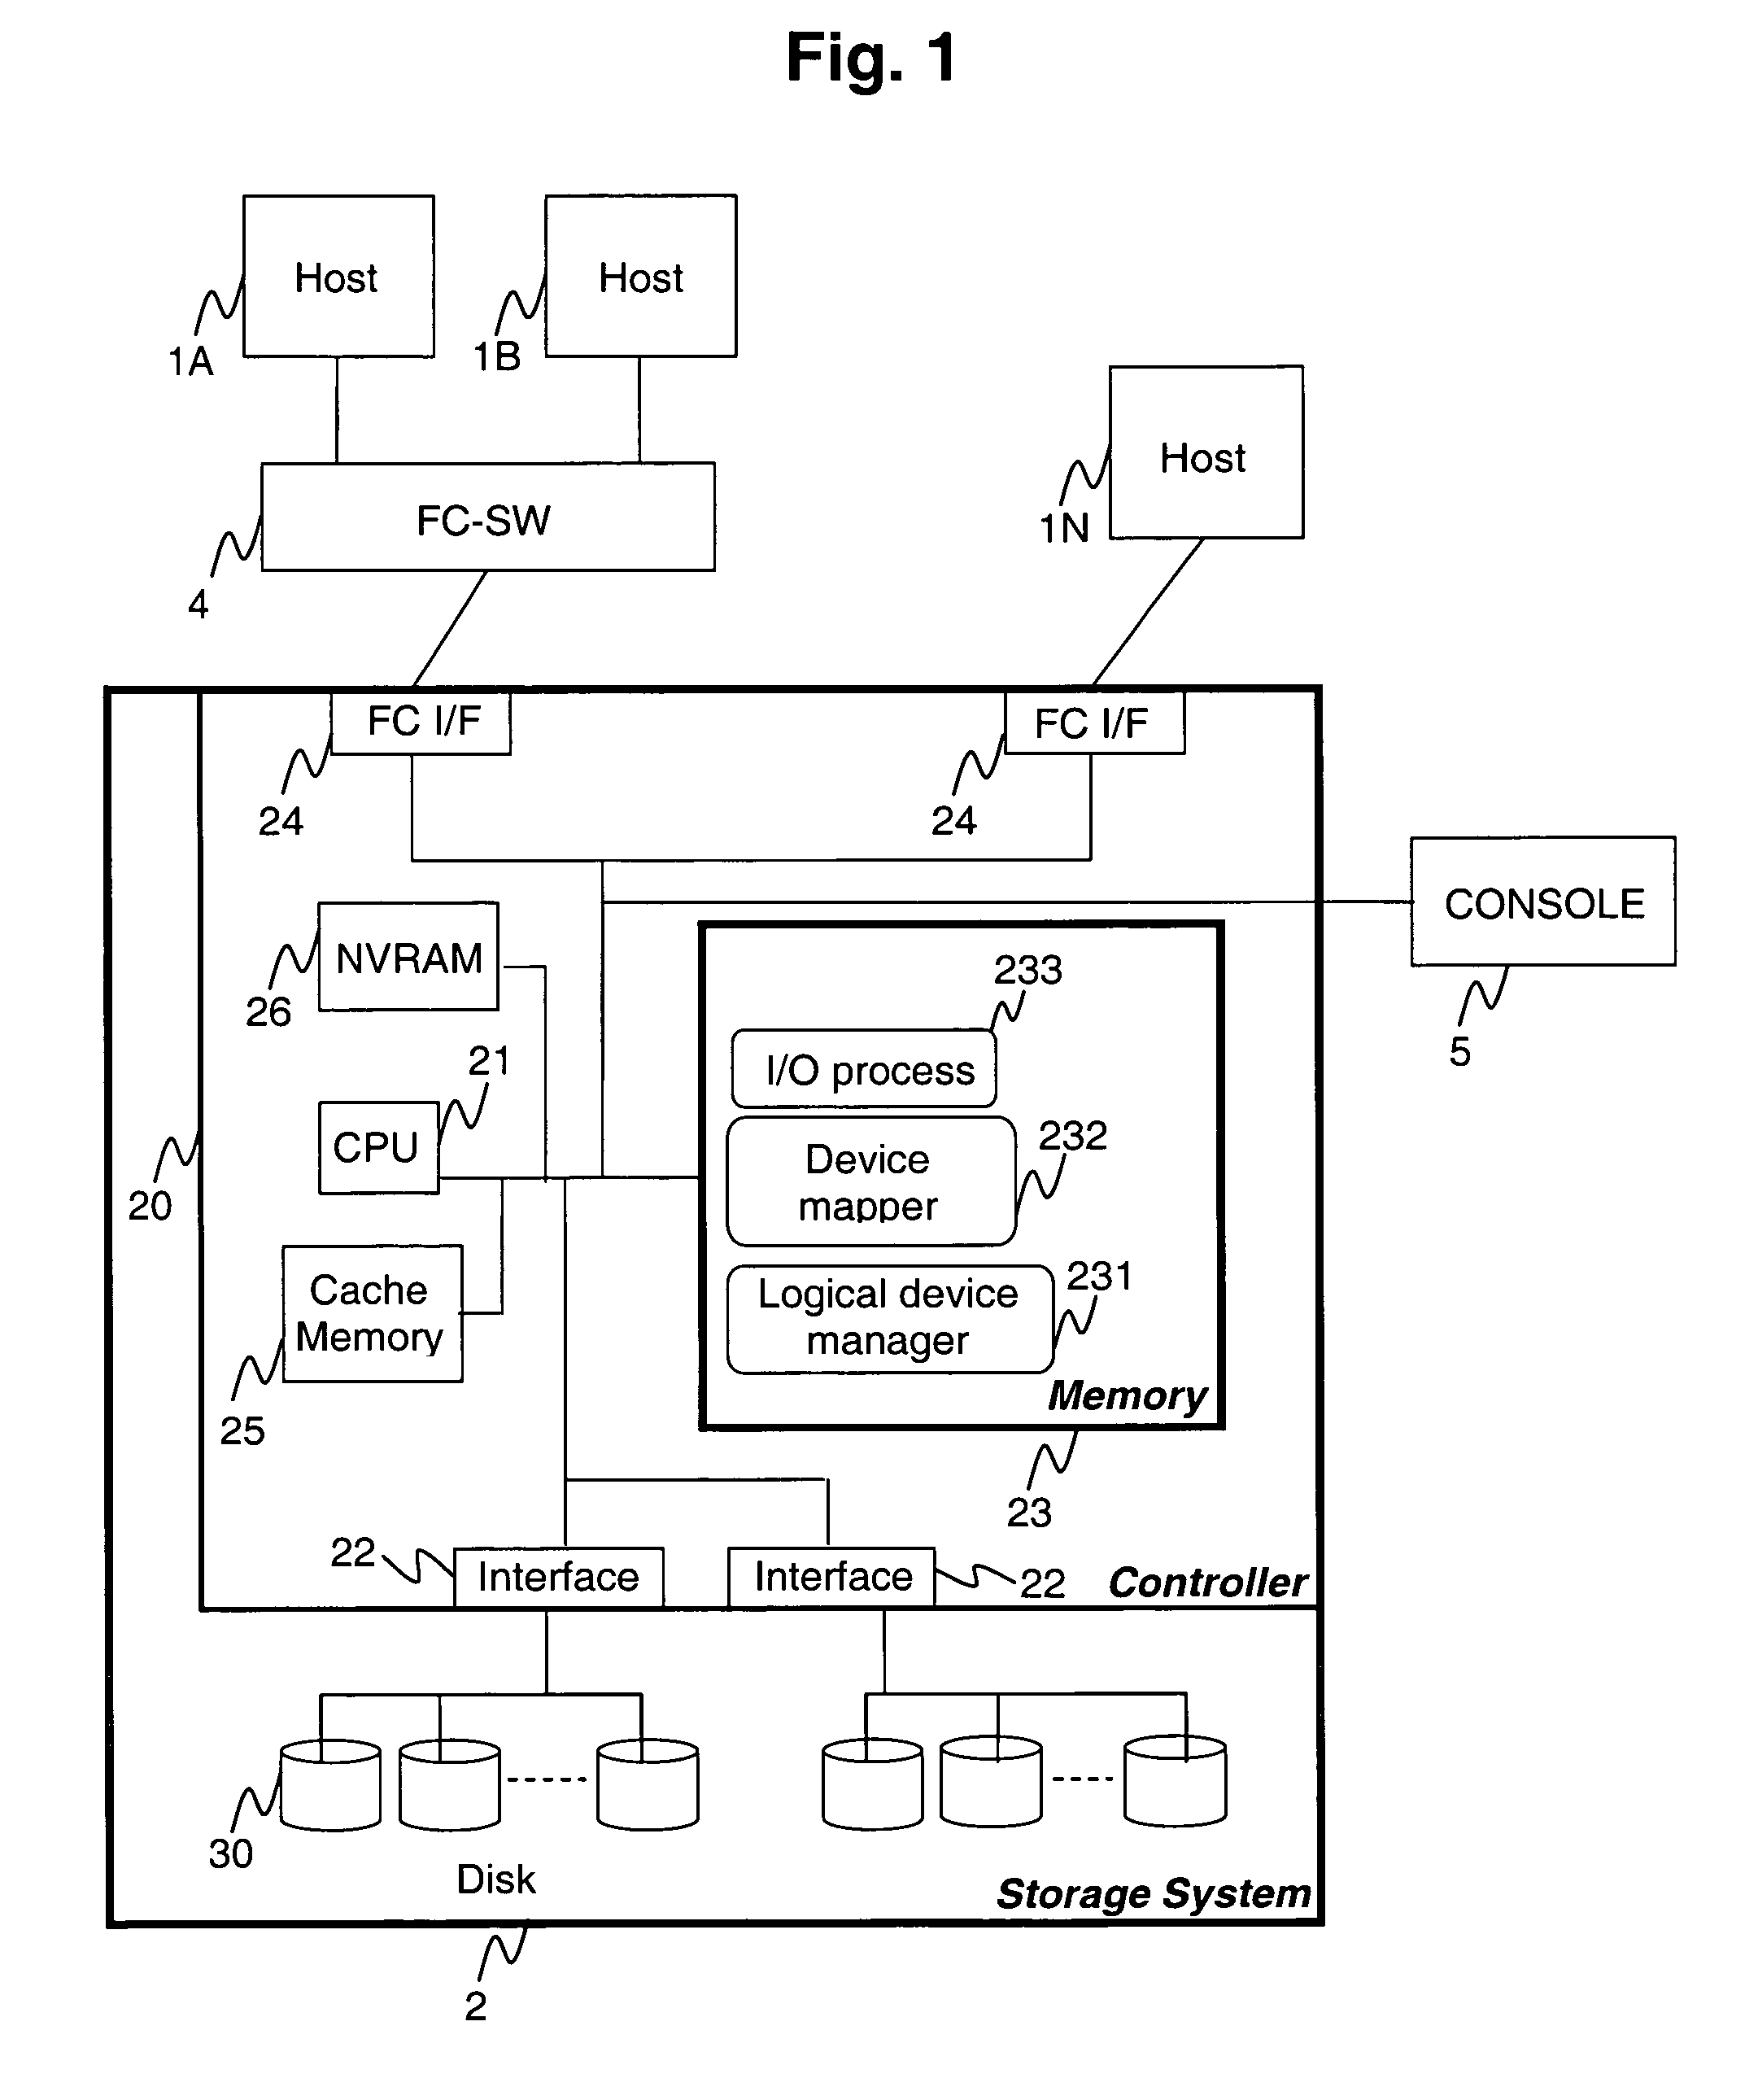 System for resource allocation to an active virtual machine using switch and controller to associate resource groups